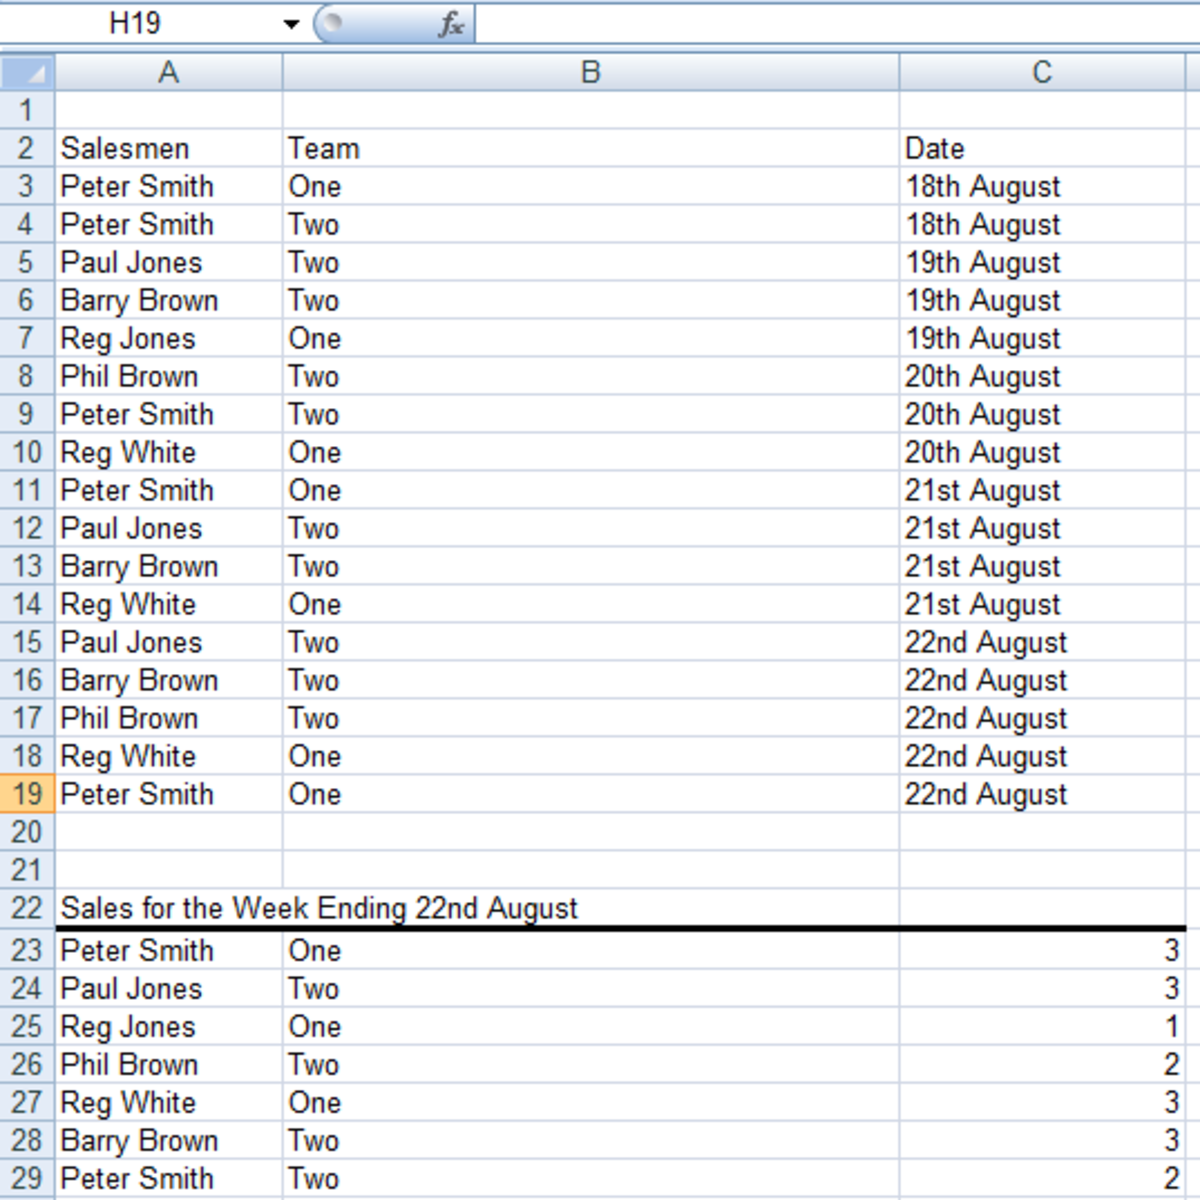 Table created using a COUNTIFS formula in Excel 2007 and Excel 2010.